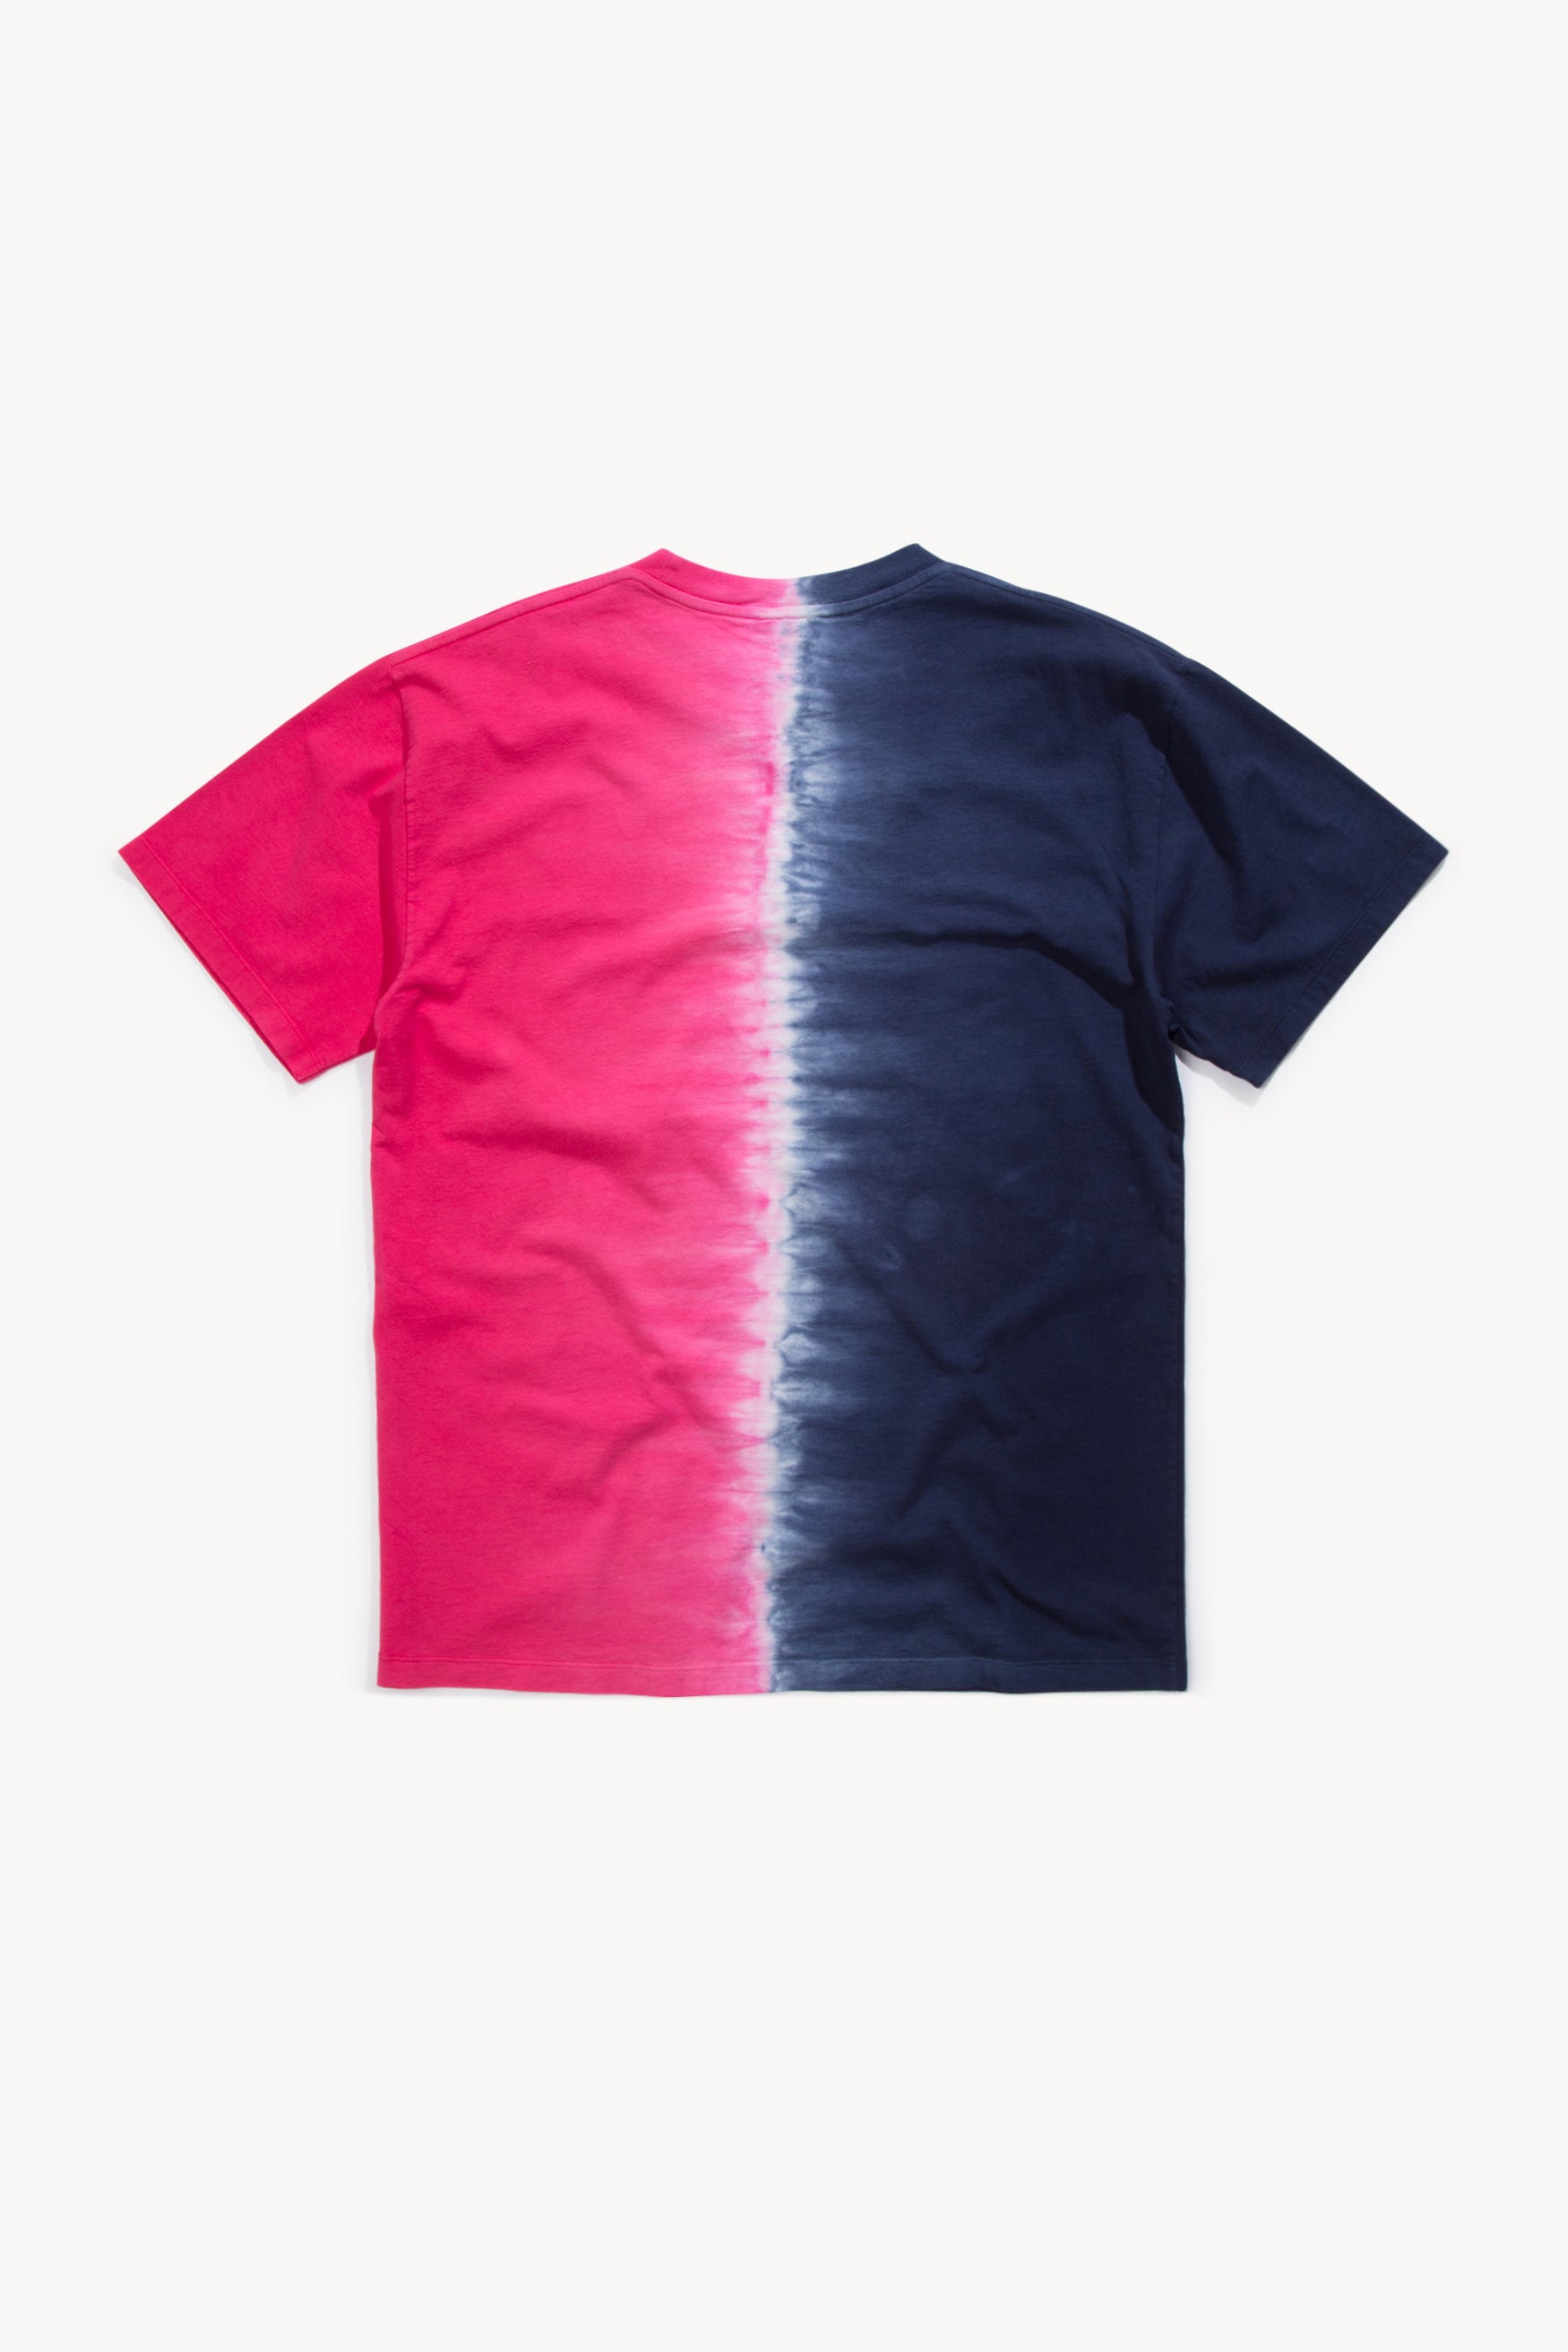 Load image into Gallery viewer, Tie Dye Half and Half Tee